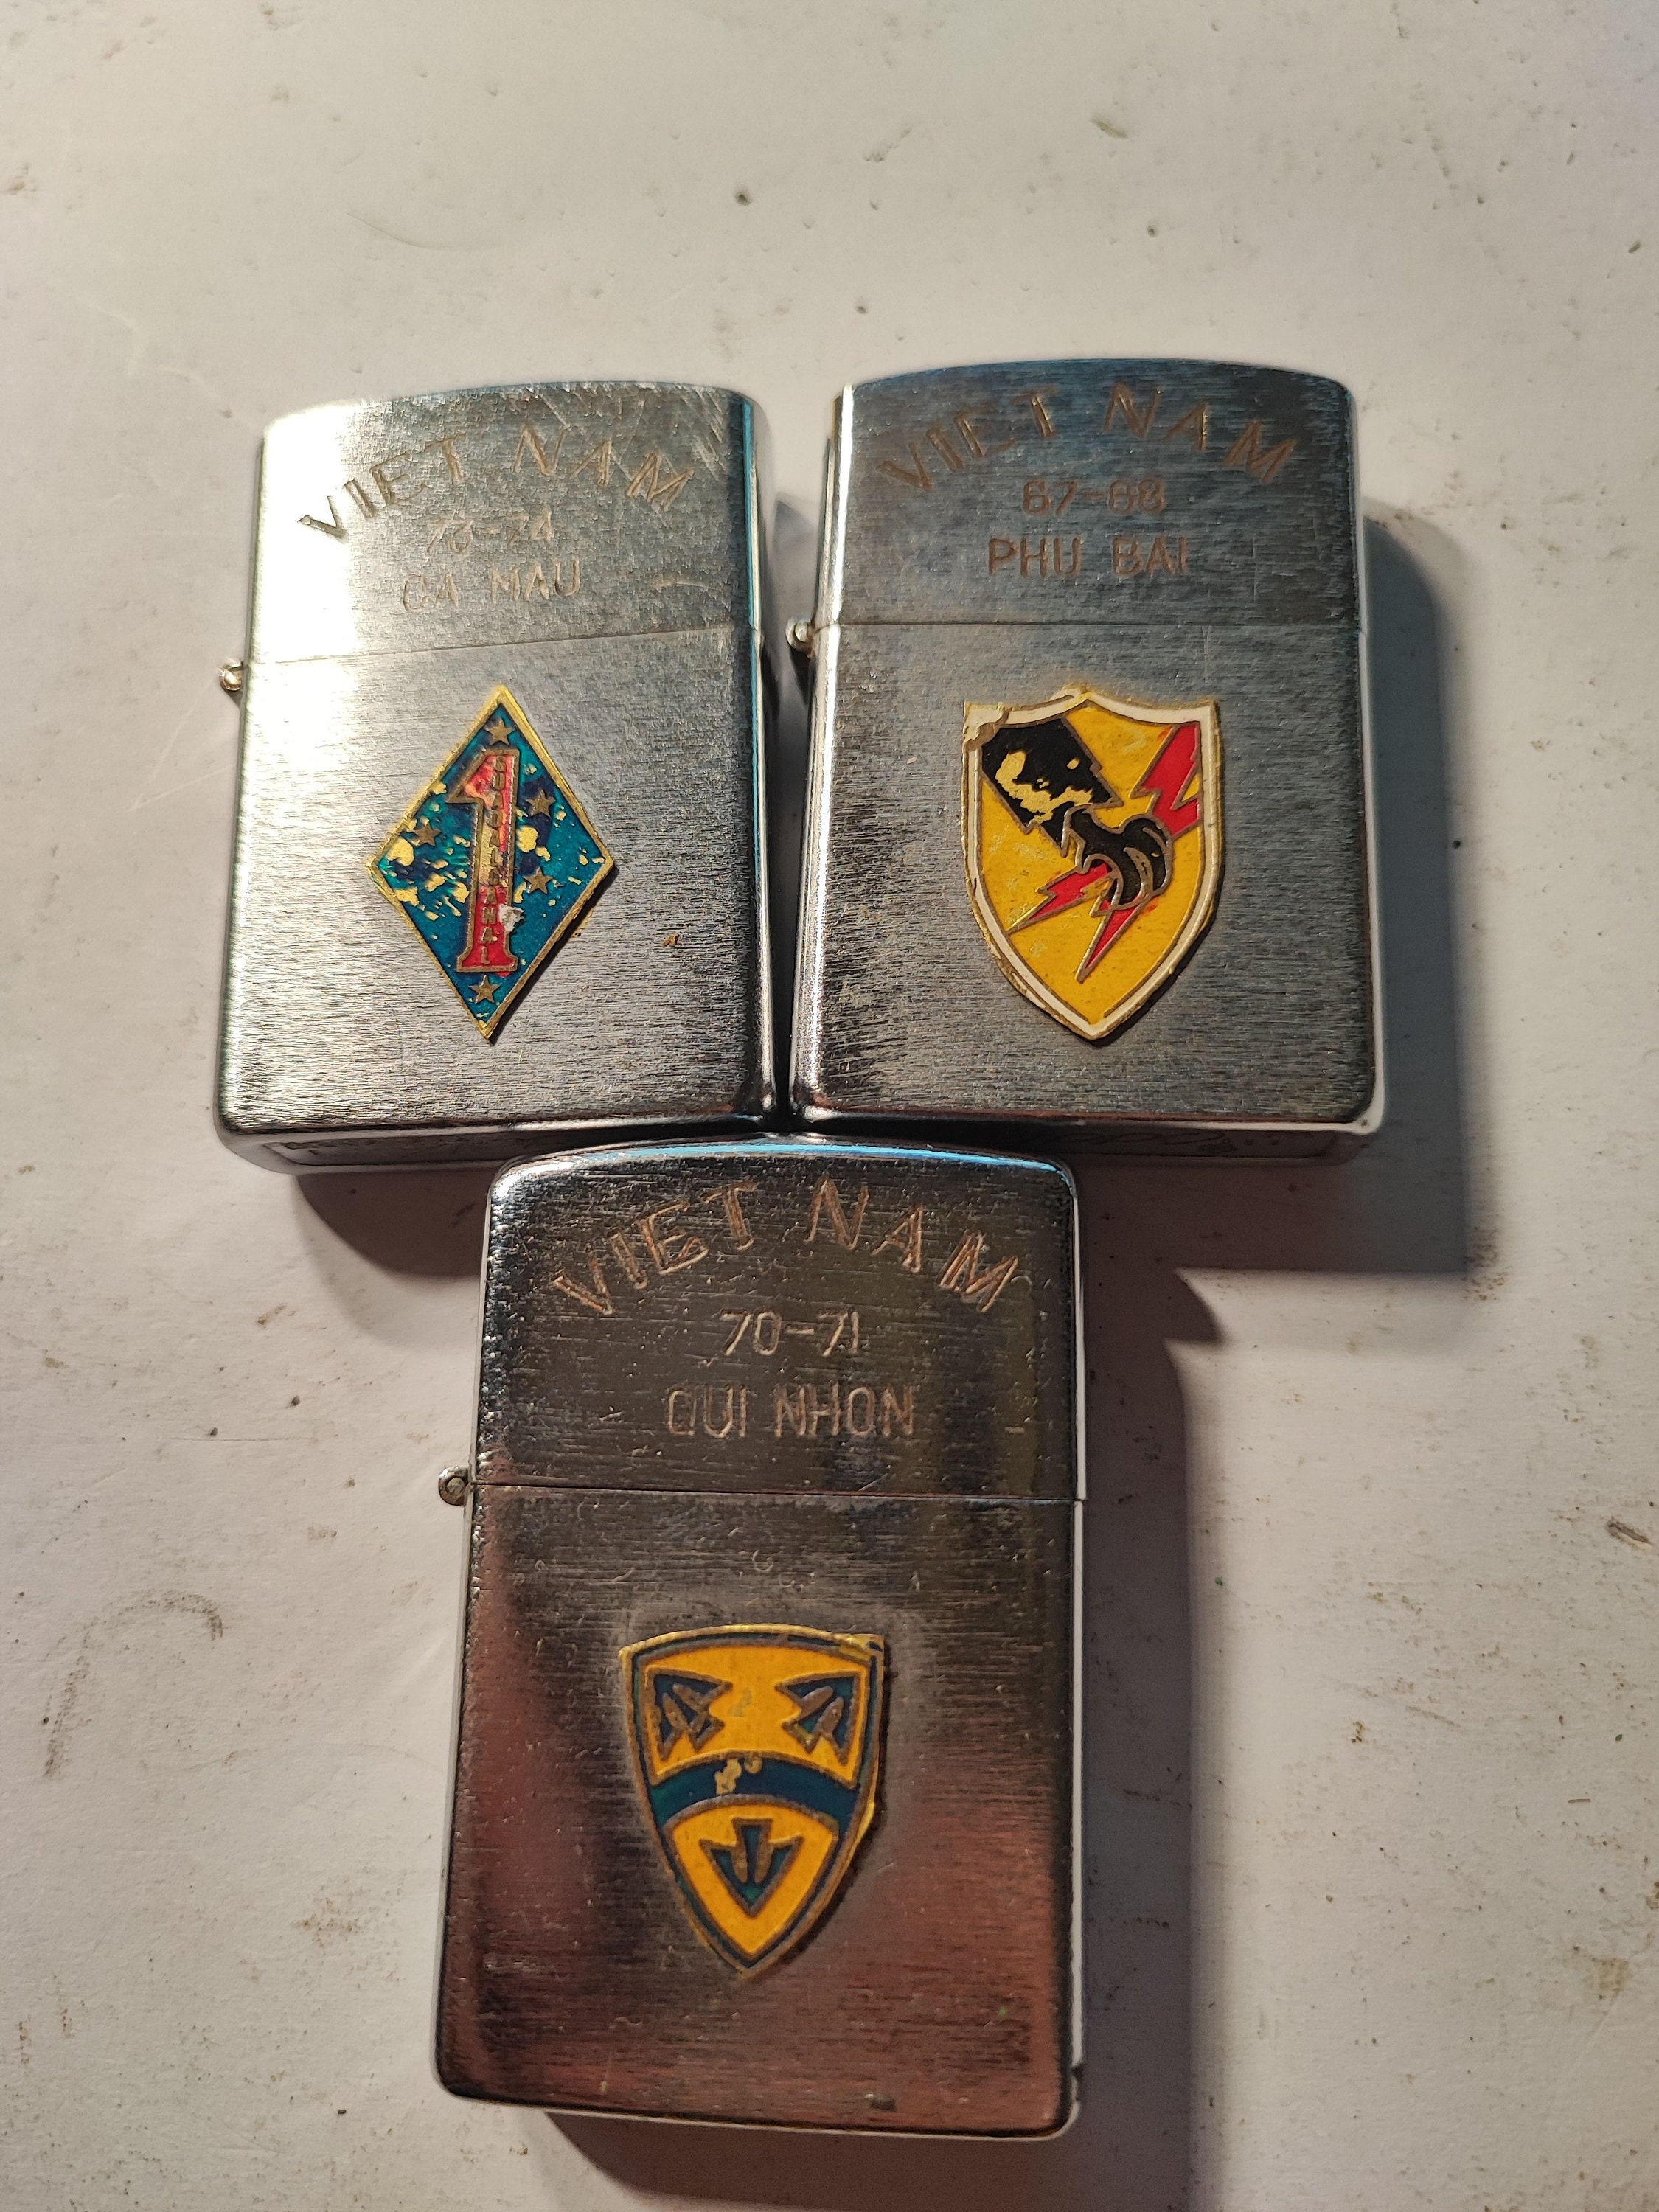 Custom Engraved Zippo Lighters, Military Tags, Pet IDs, Money Clips - Gifts  & Gadgets - Bessemer, AL